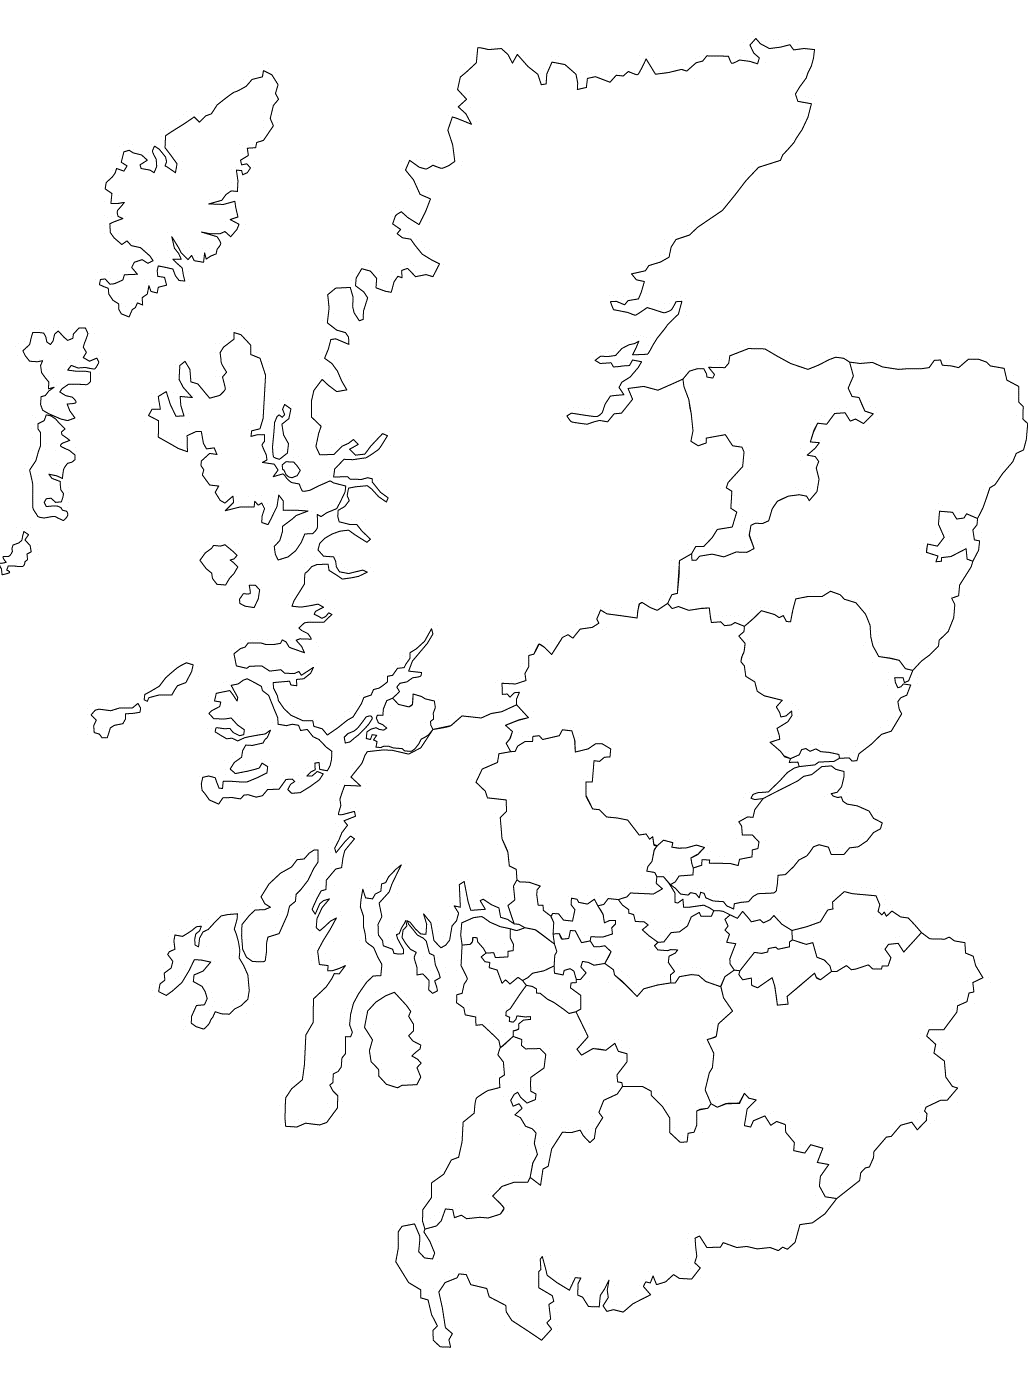 Blank outline maps of scotland